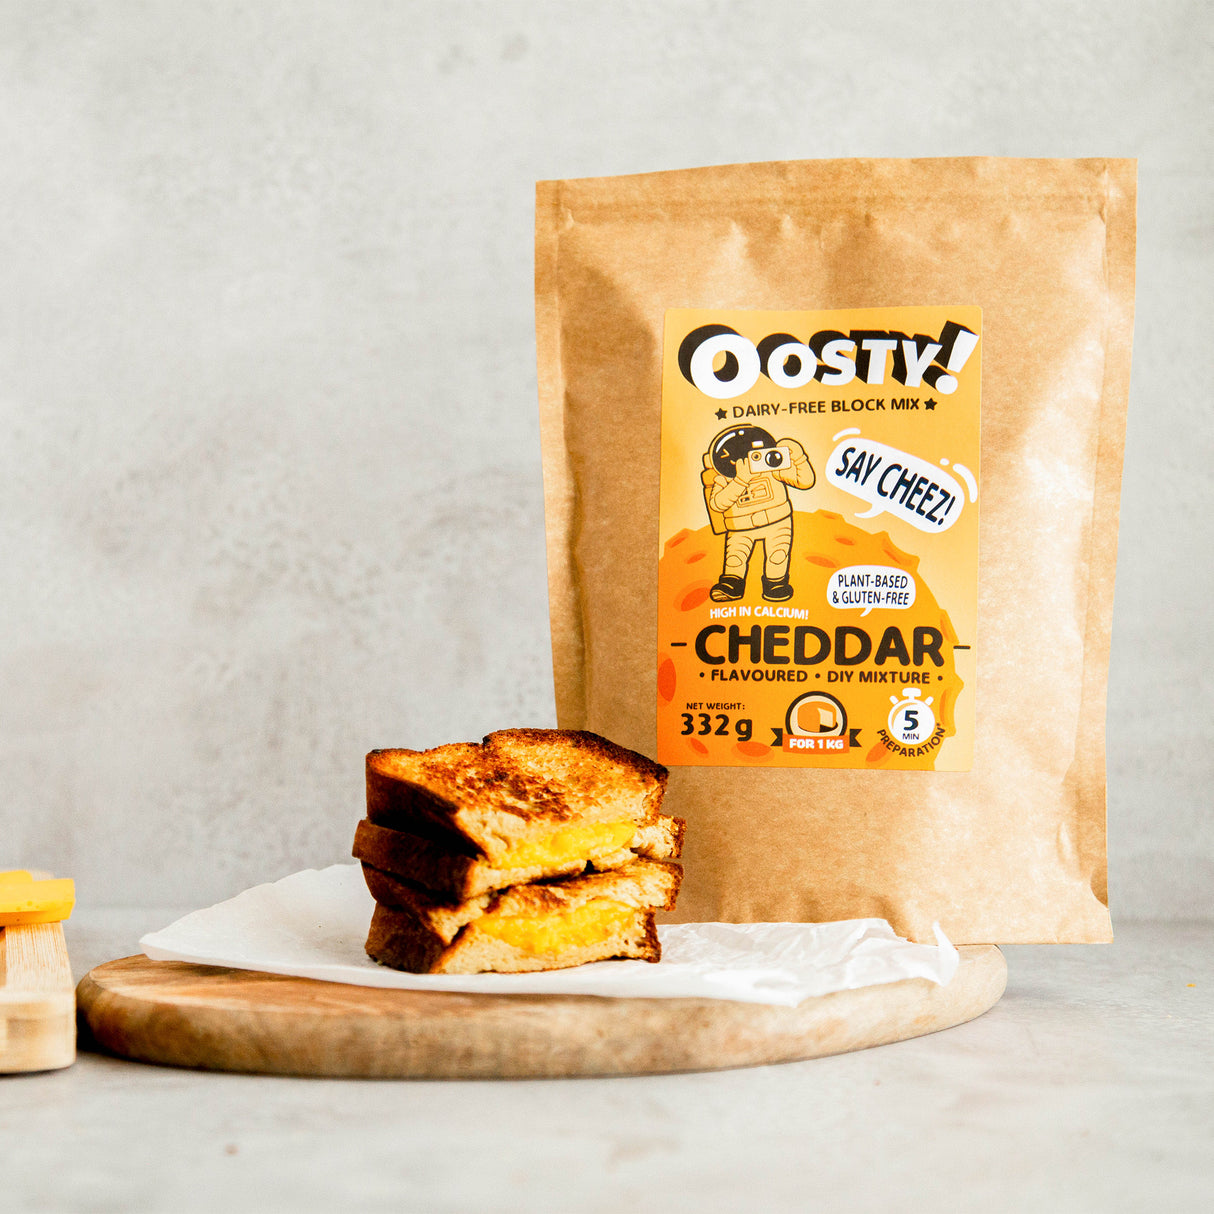 Oosty Cheddar flavoured plant-based mixture 332g